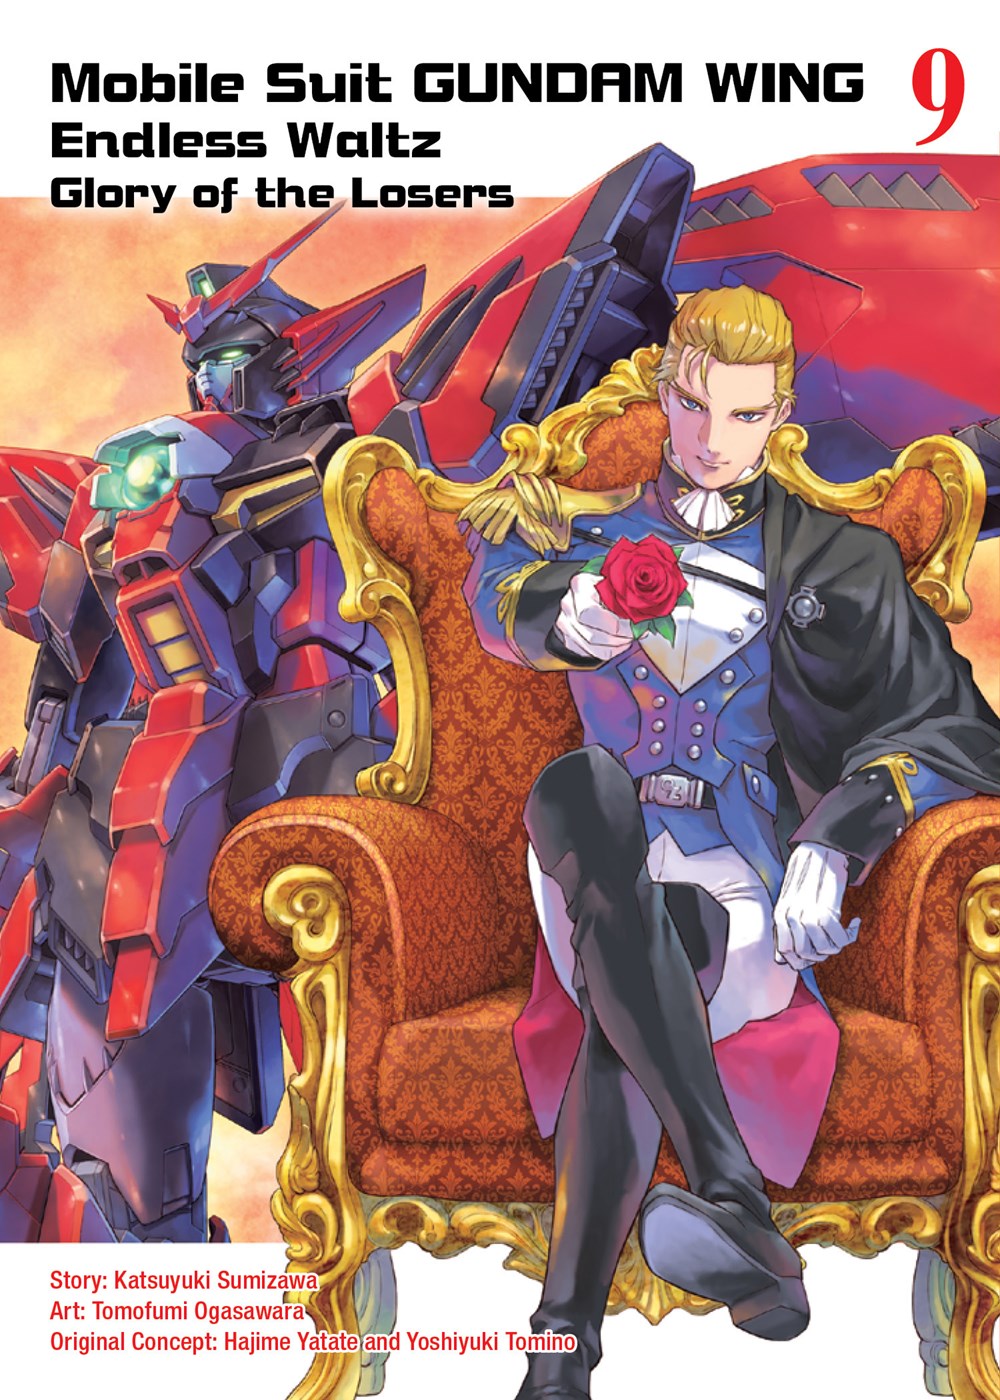 Mobile Suit Gundam Wing Endless Waltz: Glory of the Losers Manga Volume 9 image count 0